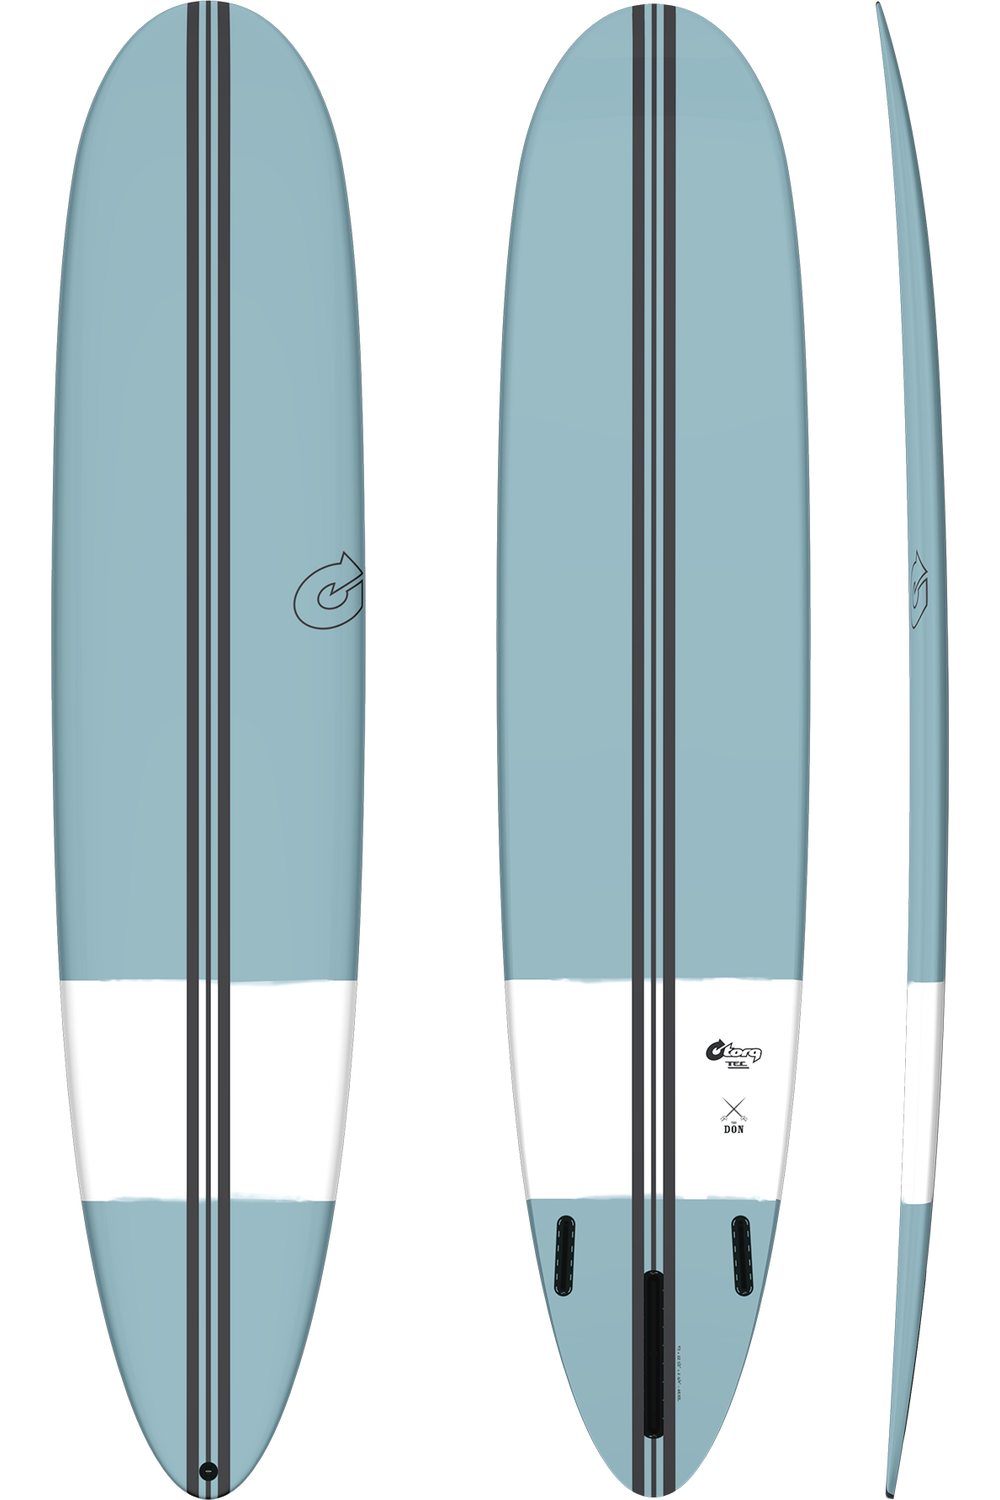 Torq TEC The Don Surfboard in Blue/White